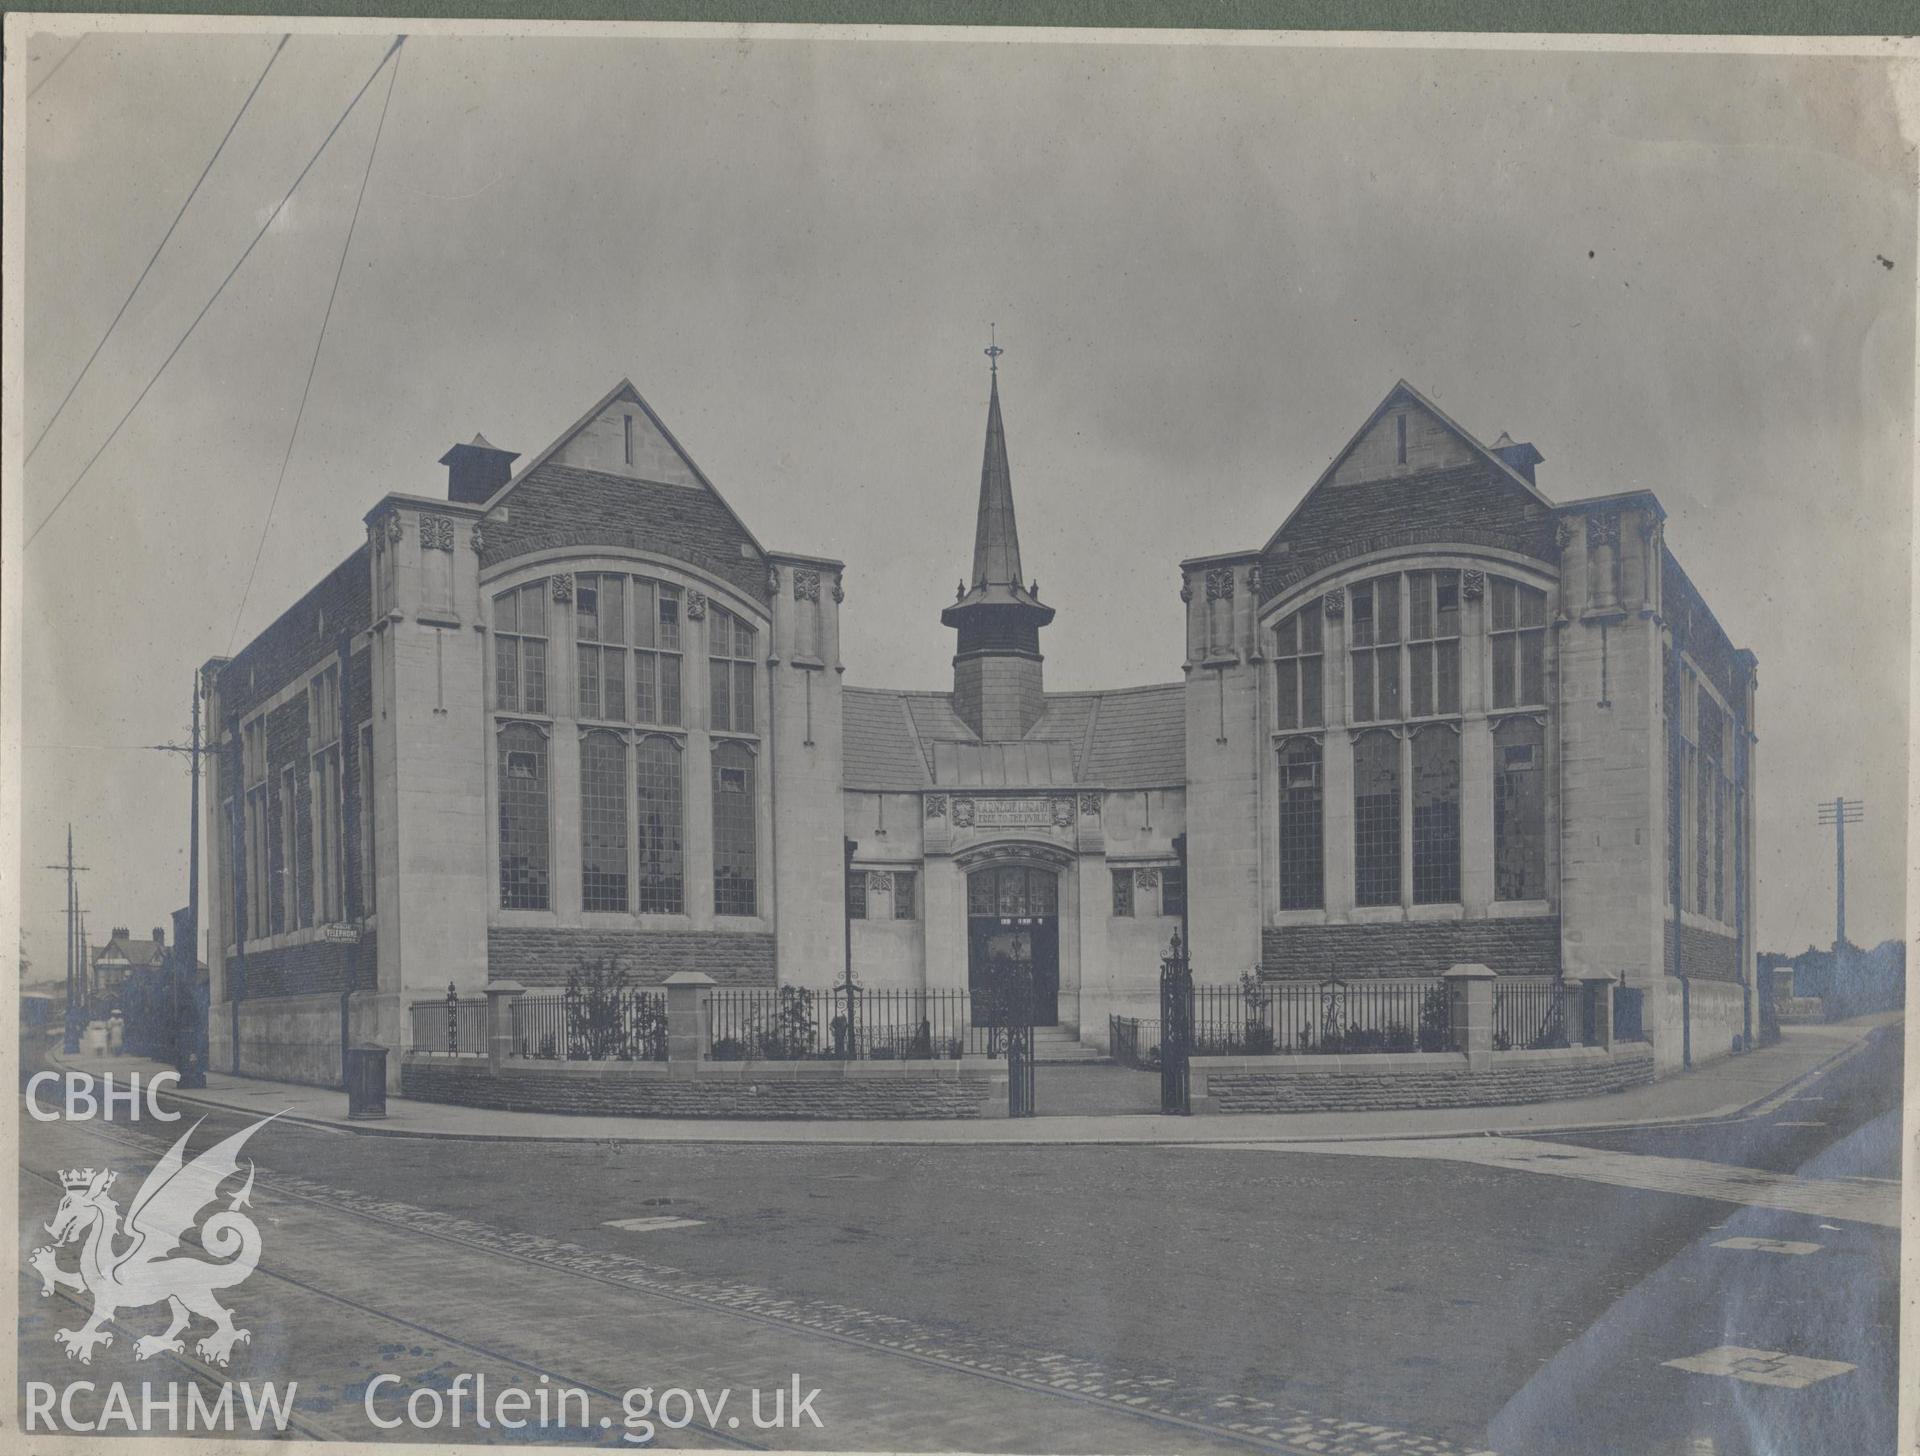 Black and white photograph showing the front exterior of Cathays Public Library, Cardiff.